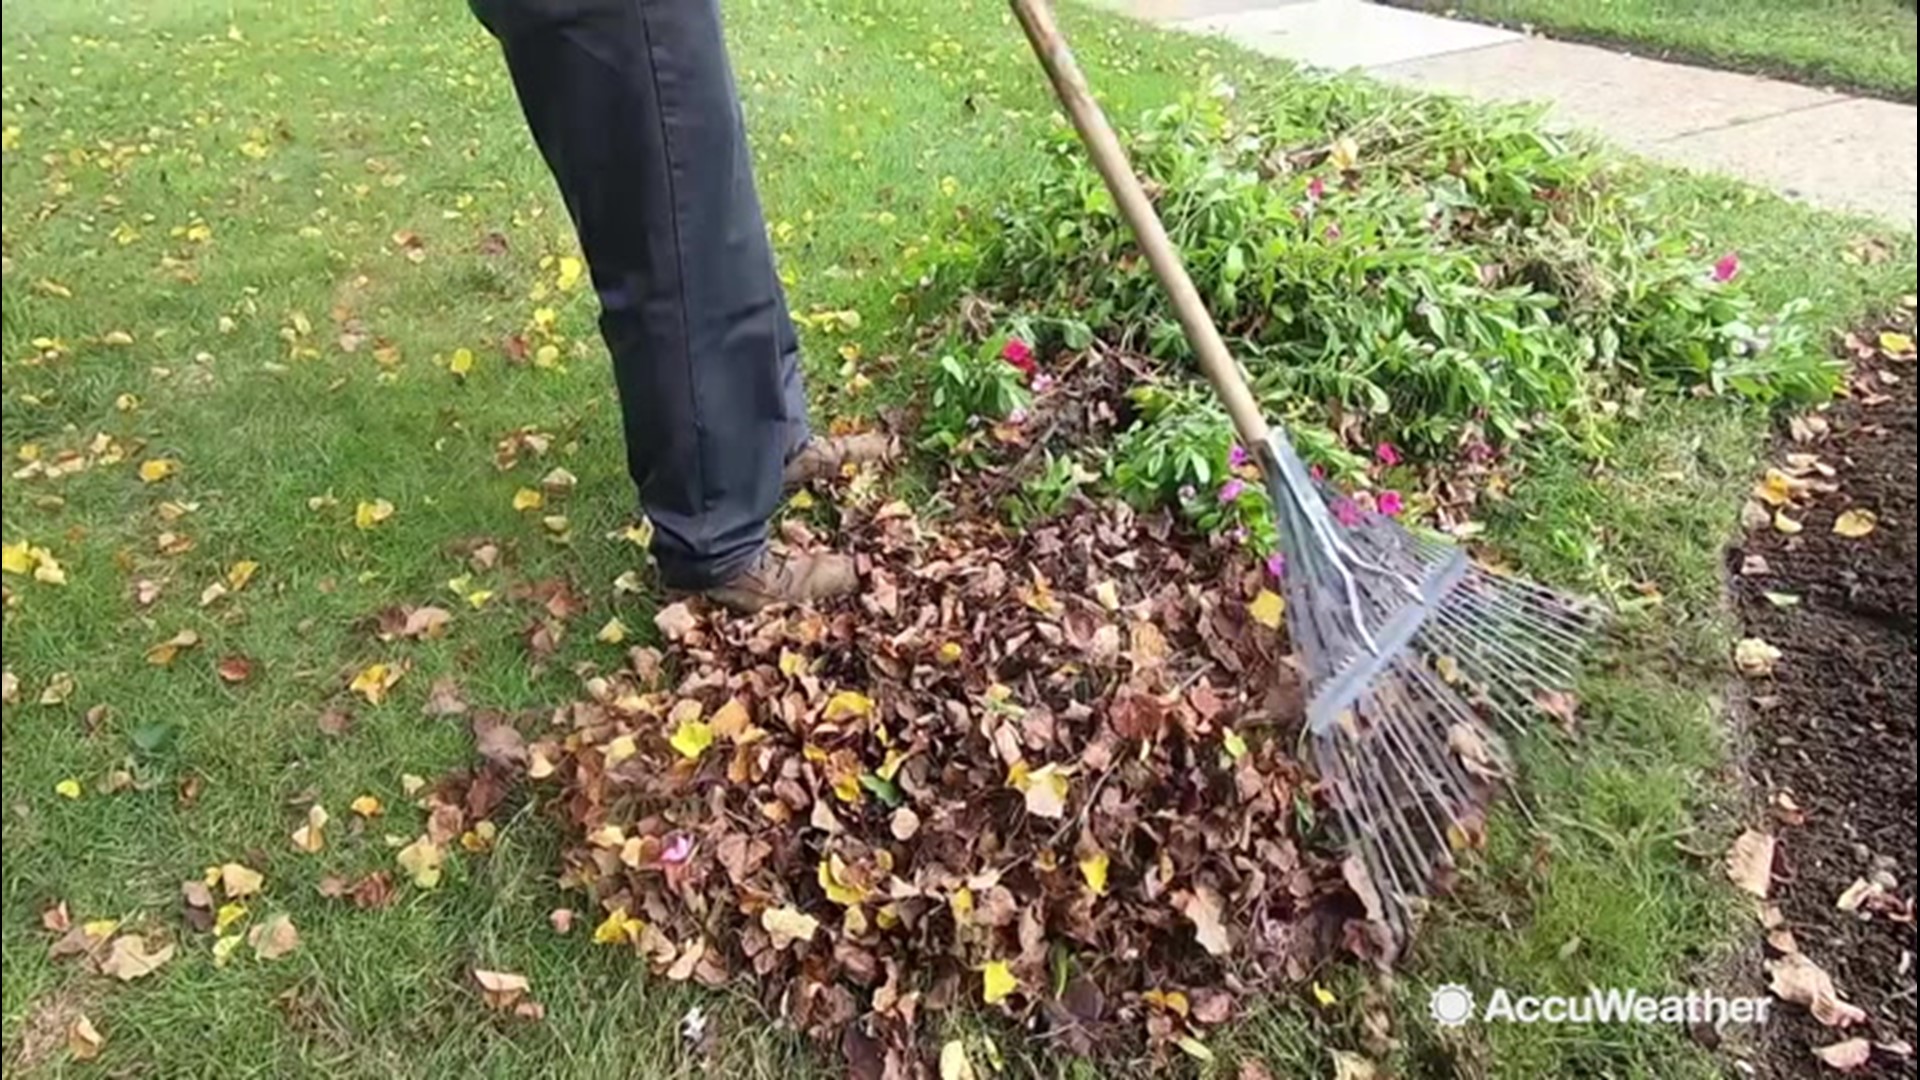 With the start of fall and cooler months ahead, Accuweather's Dexter Henry talked to a Northeast lawn care expert about how to winterize your lawn.